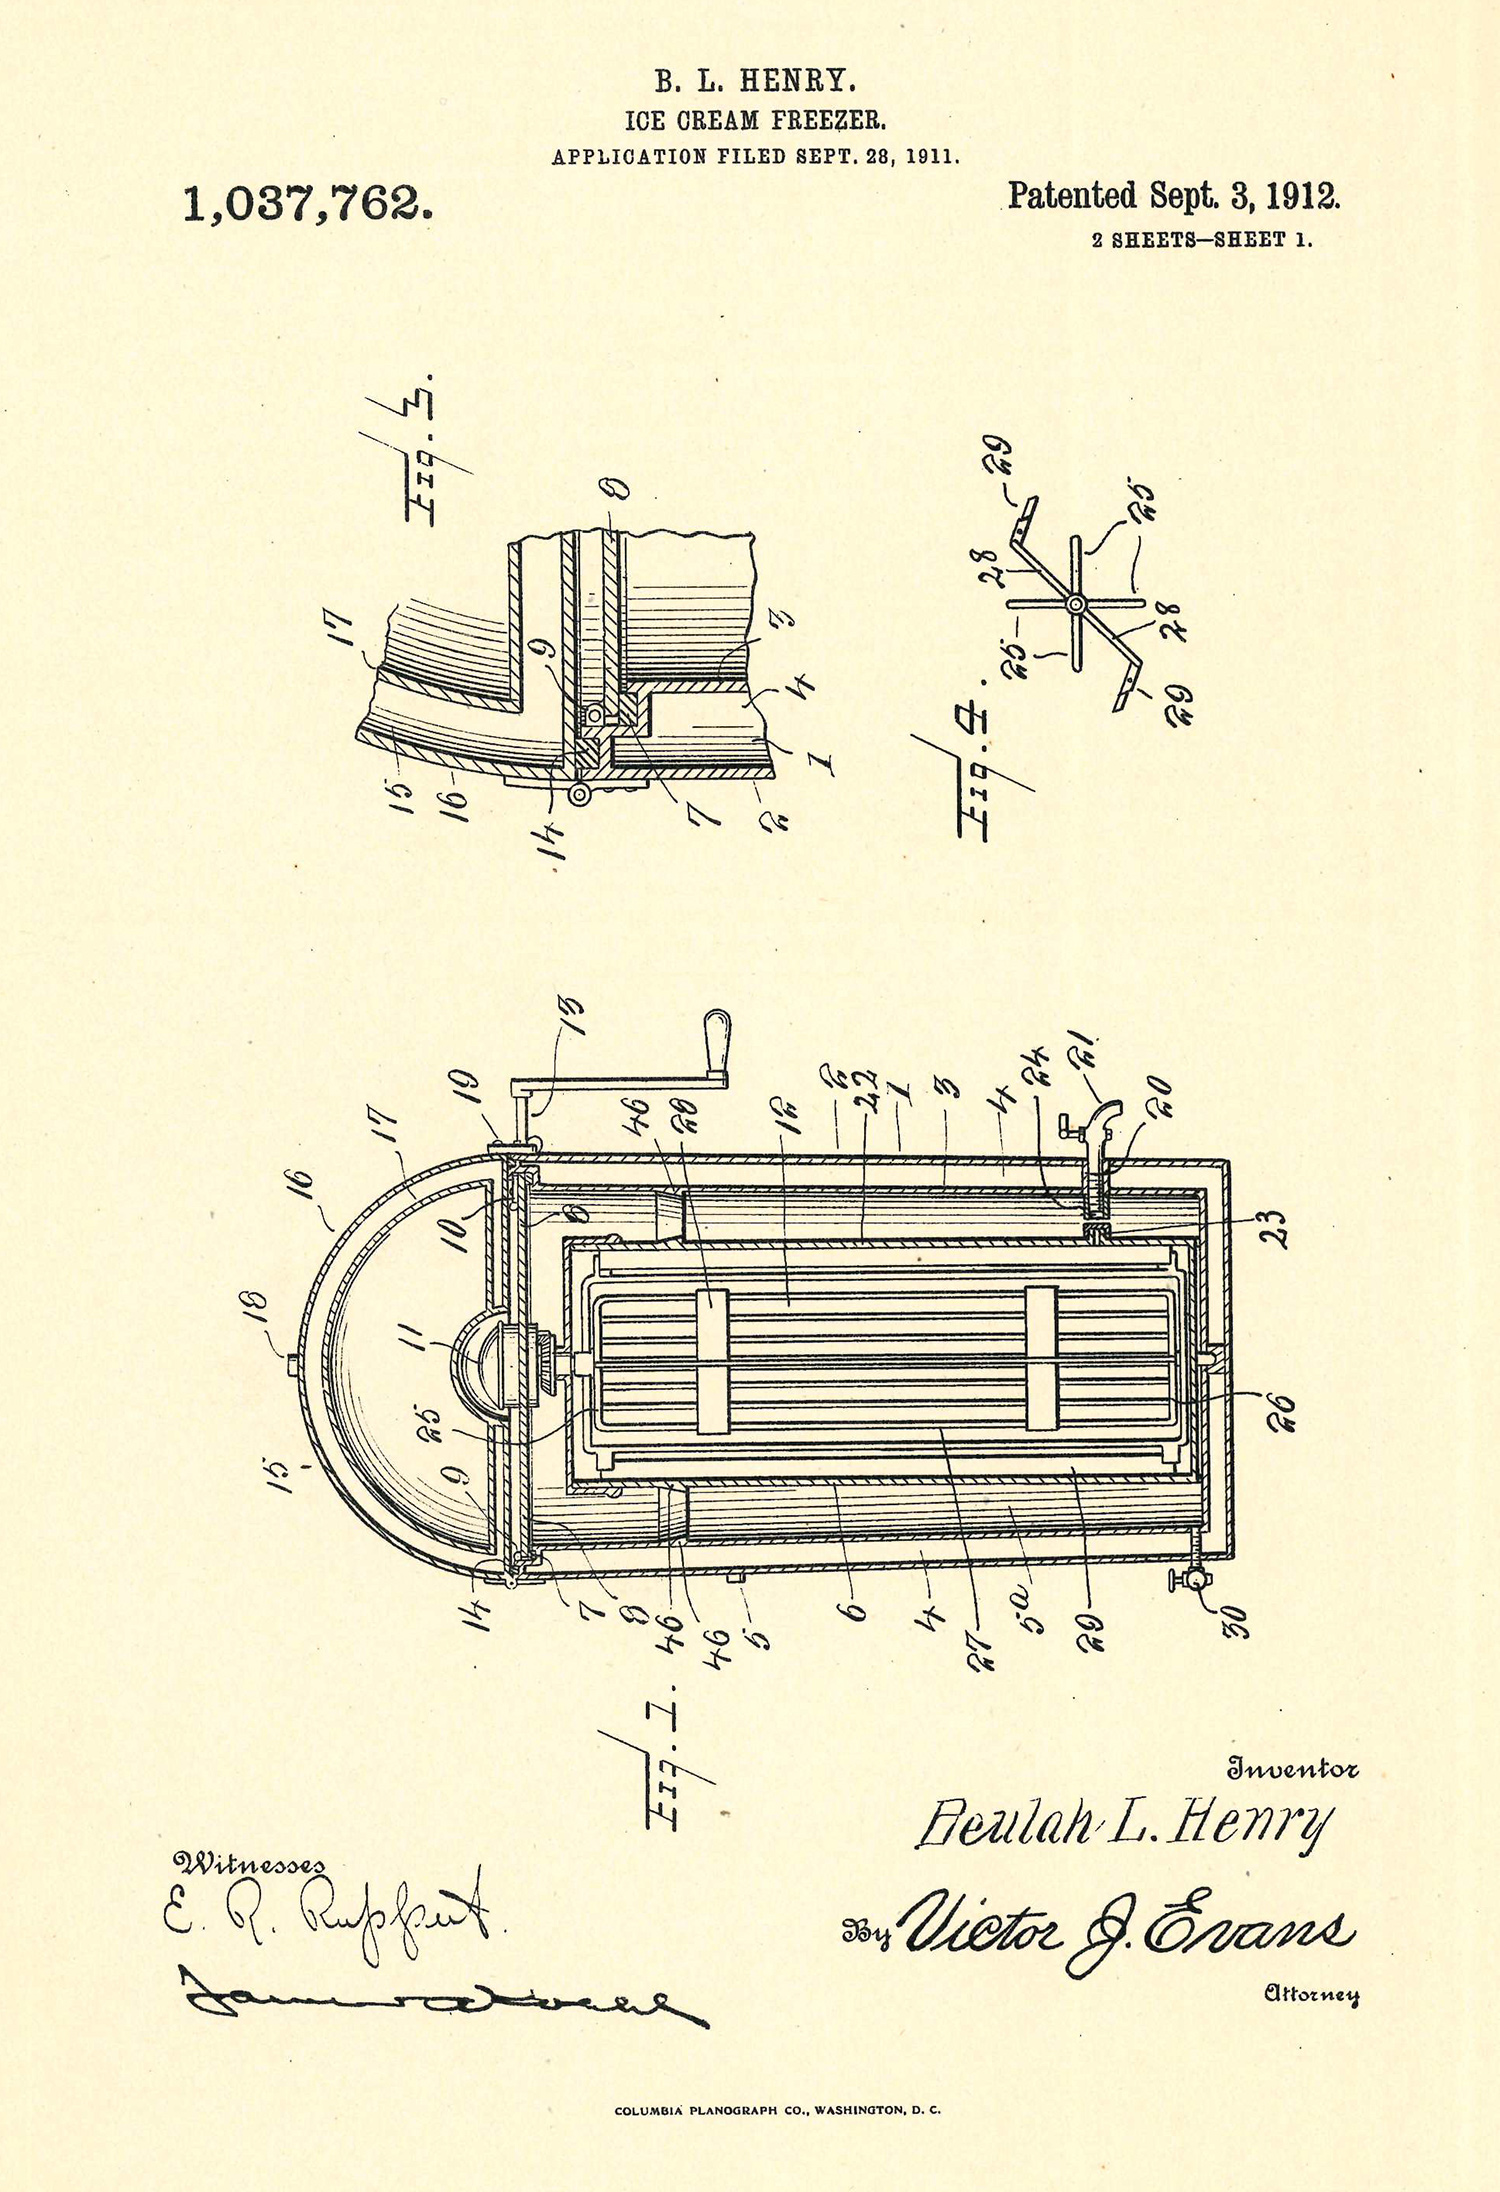 Patent showing the inner workings of a rectangular-shaped ice-cream freezer with a domed top and a hand crank